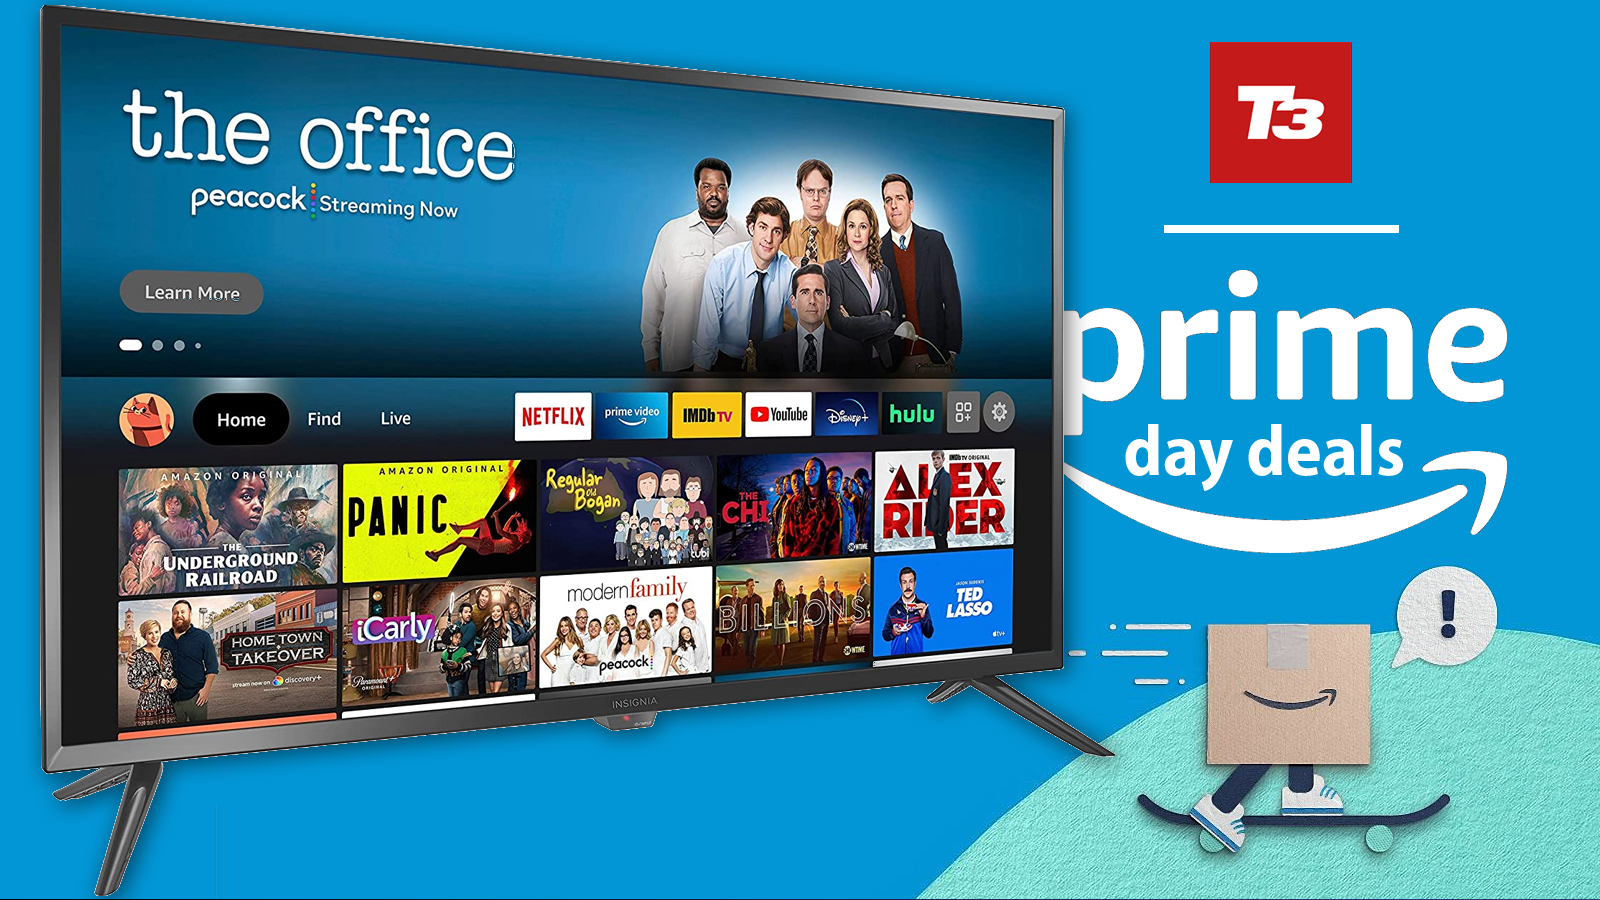 Should You Buy a Cheap Fire TV on Prime Day? - CNET